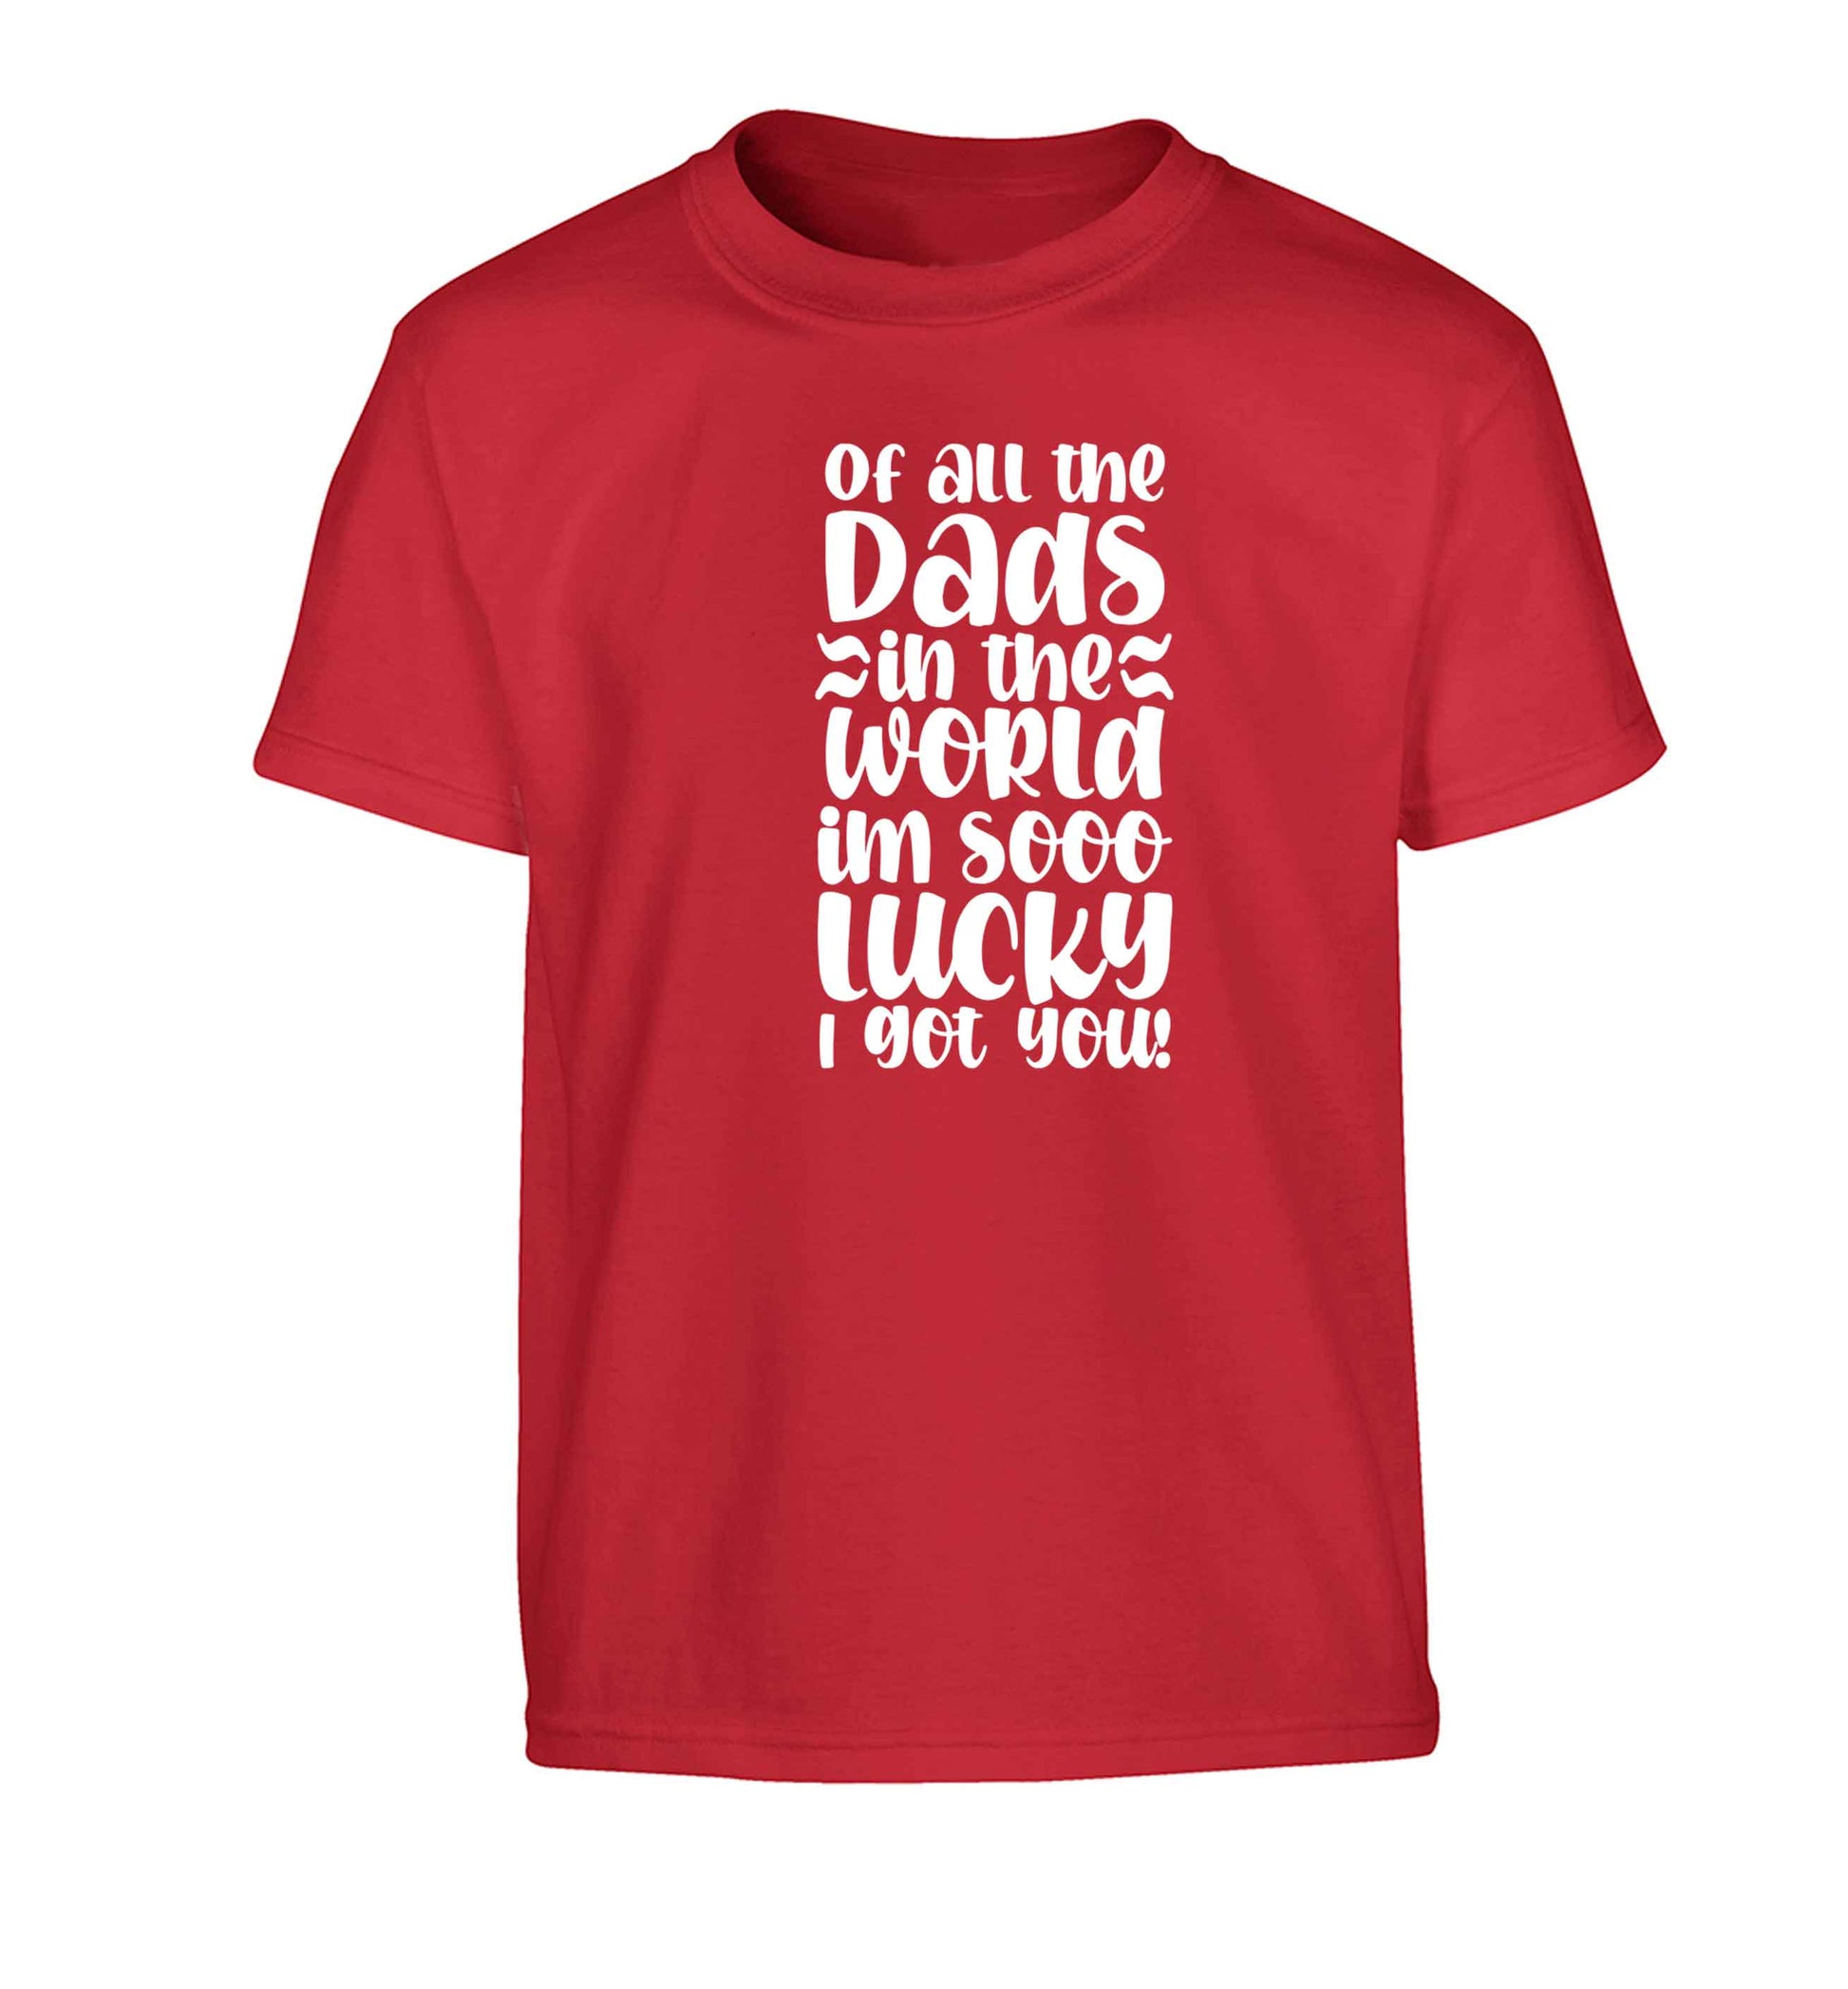 I'm as lucky as can be the worlds greatest dad belongs to me! Children's red Tshirt 12-13 Years